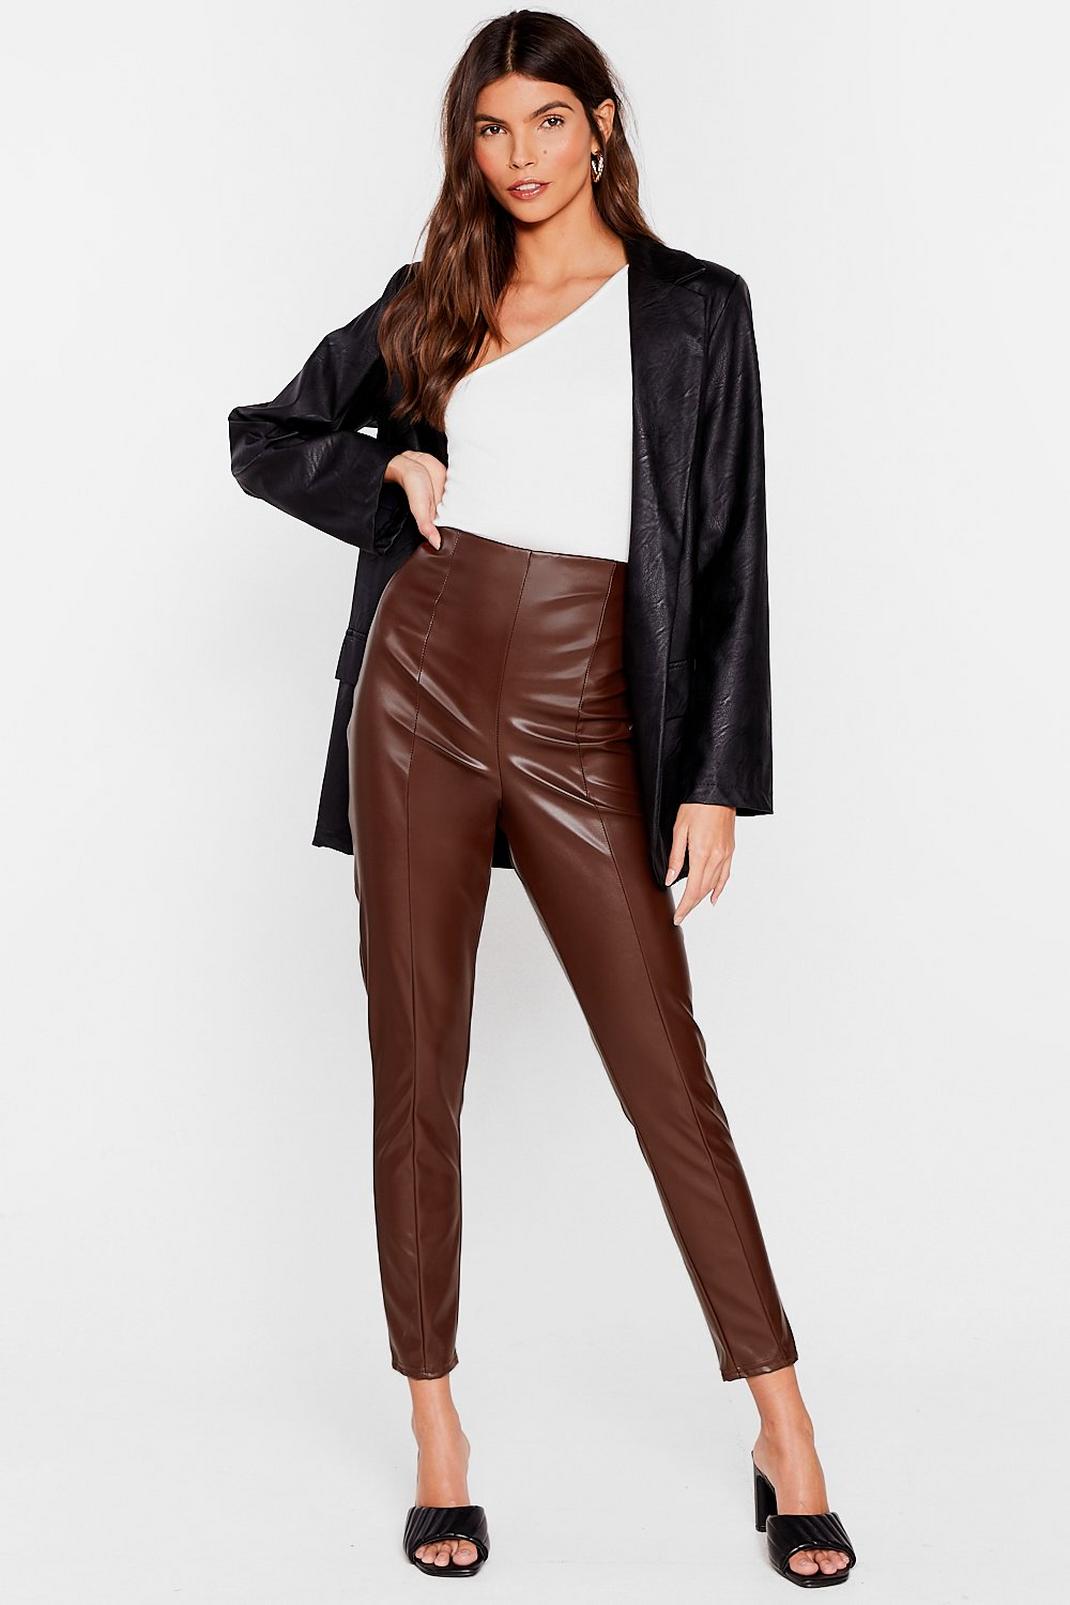 Choc brown Now More Than Faux Leather Leggings image number 1